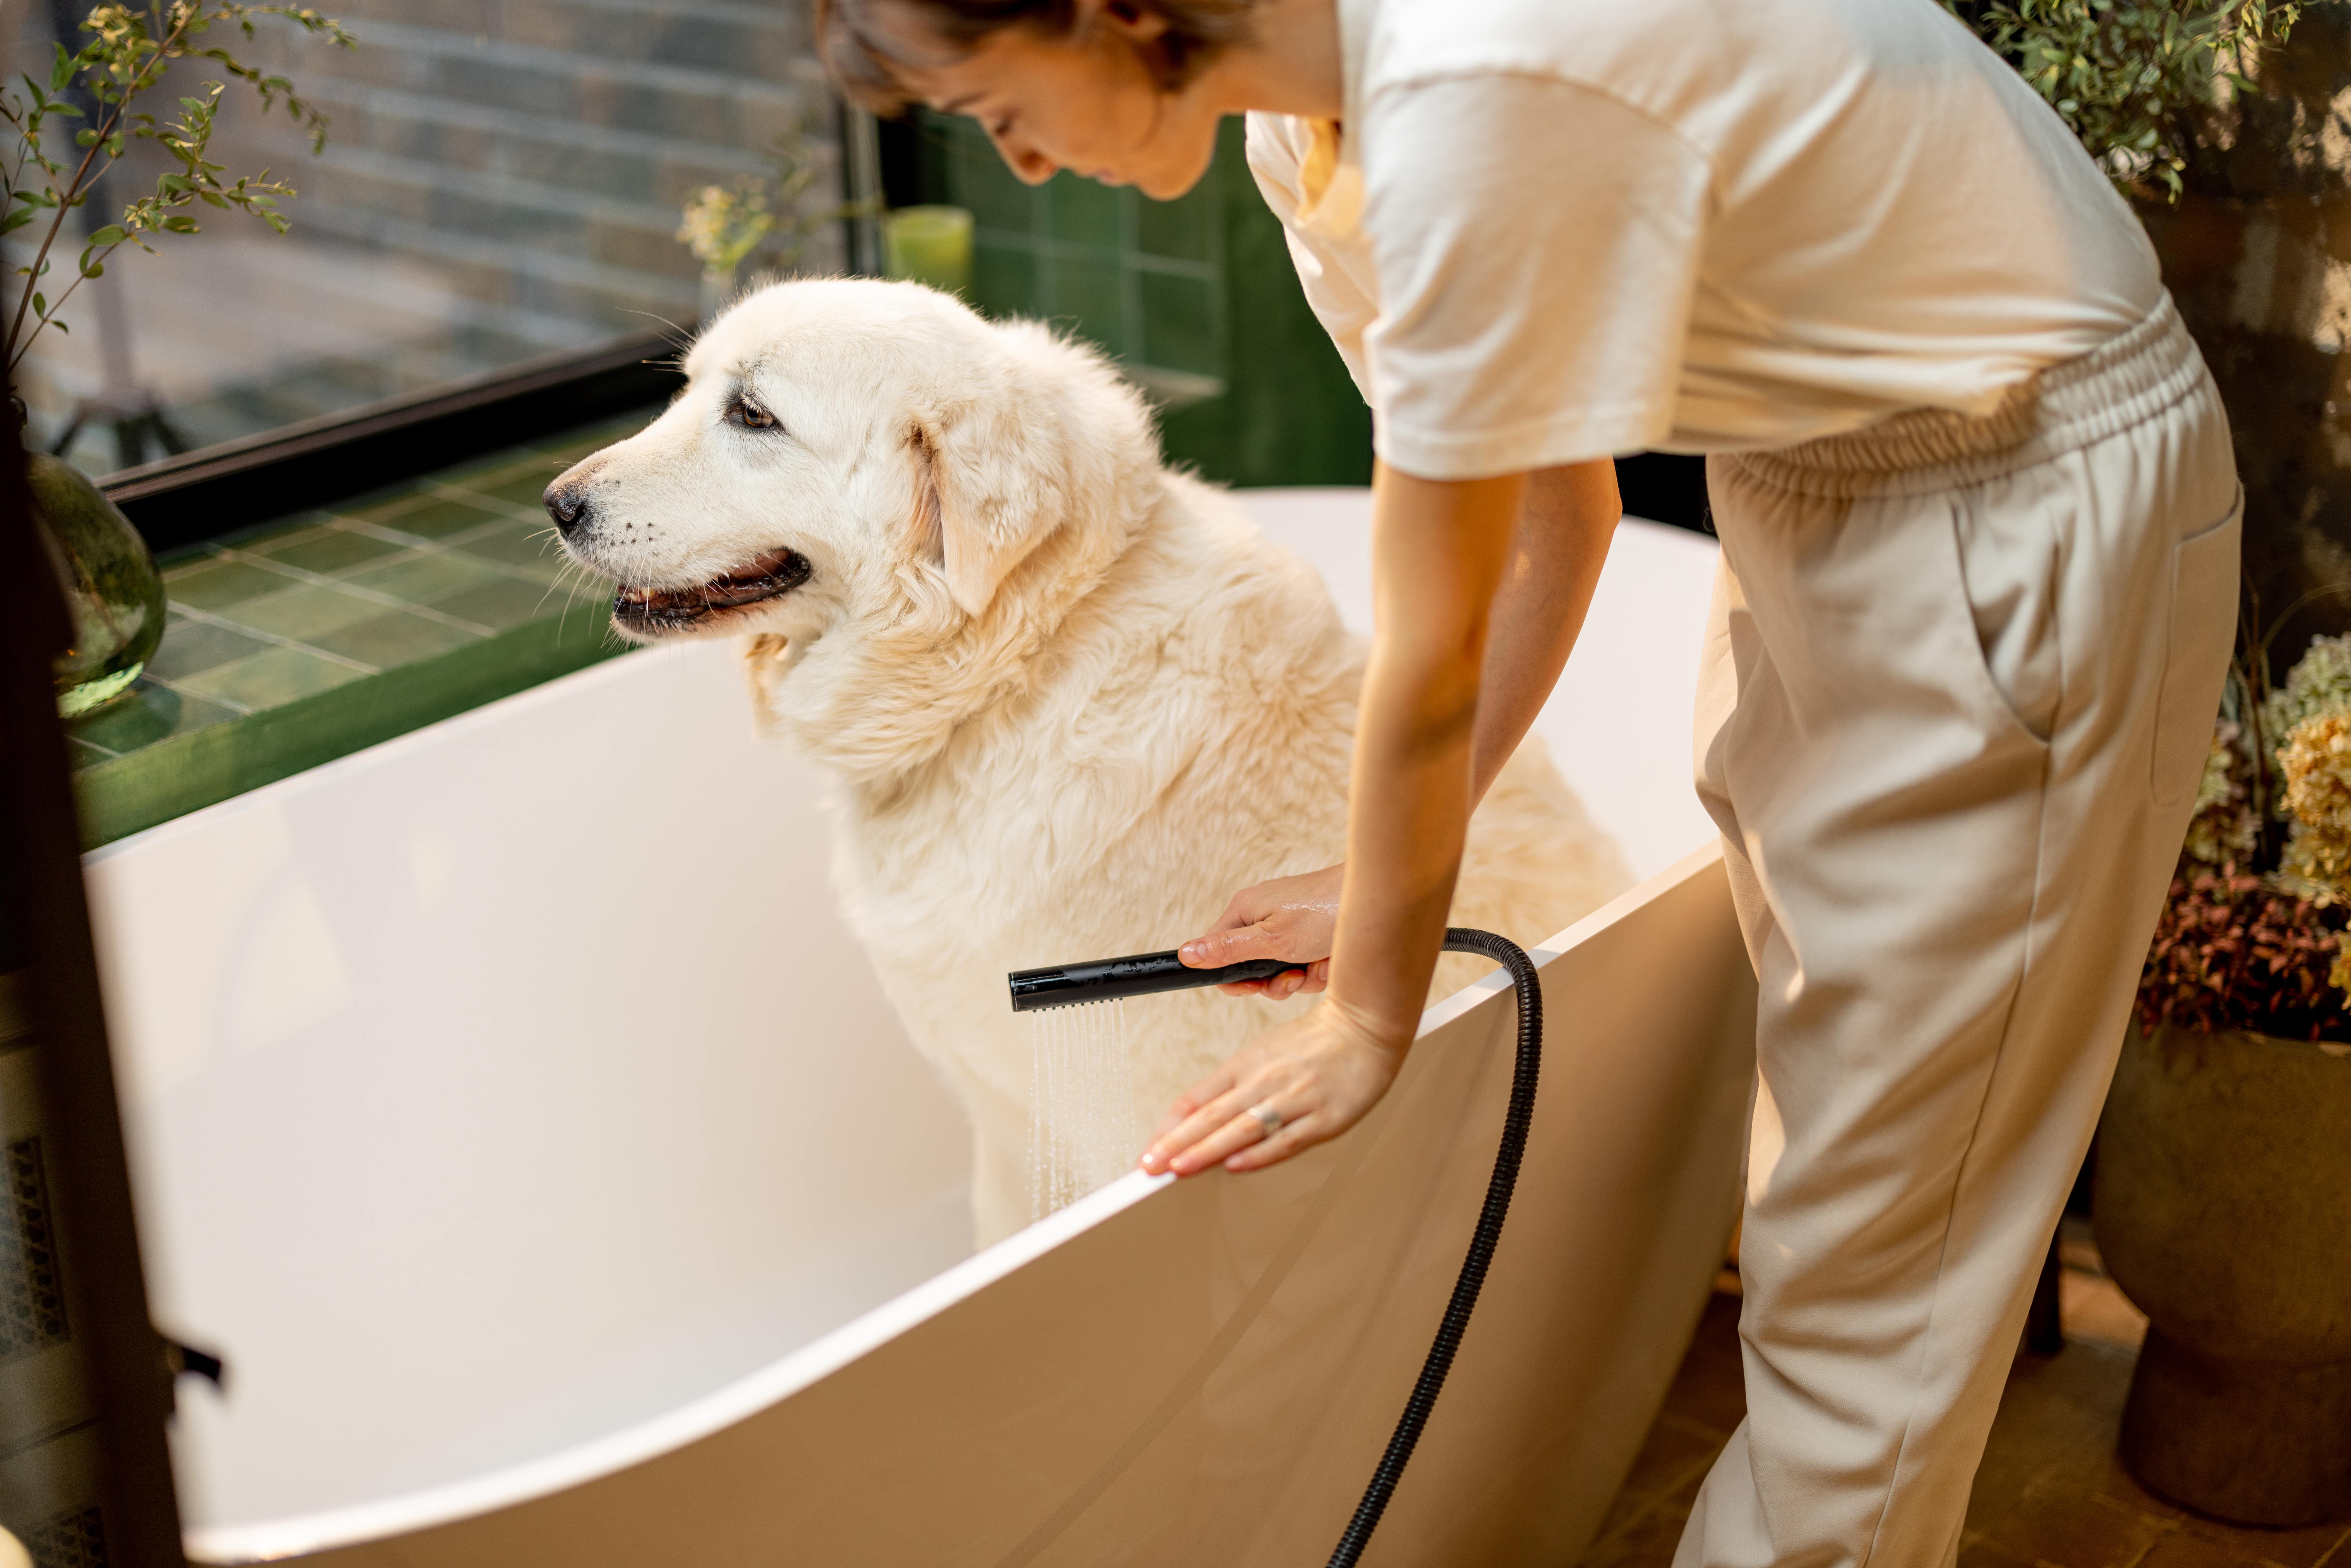 woman washes her dog in bathtub at home